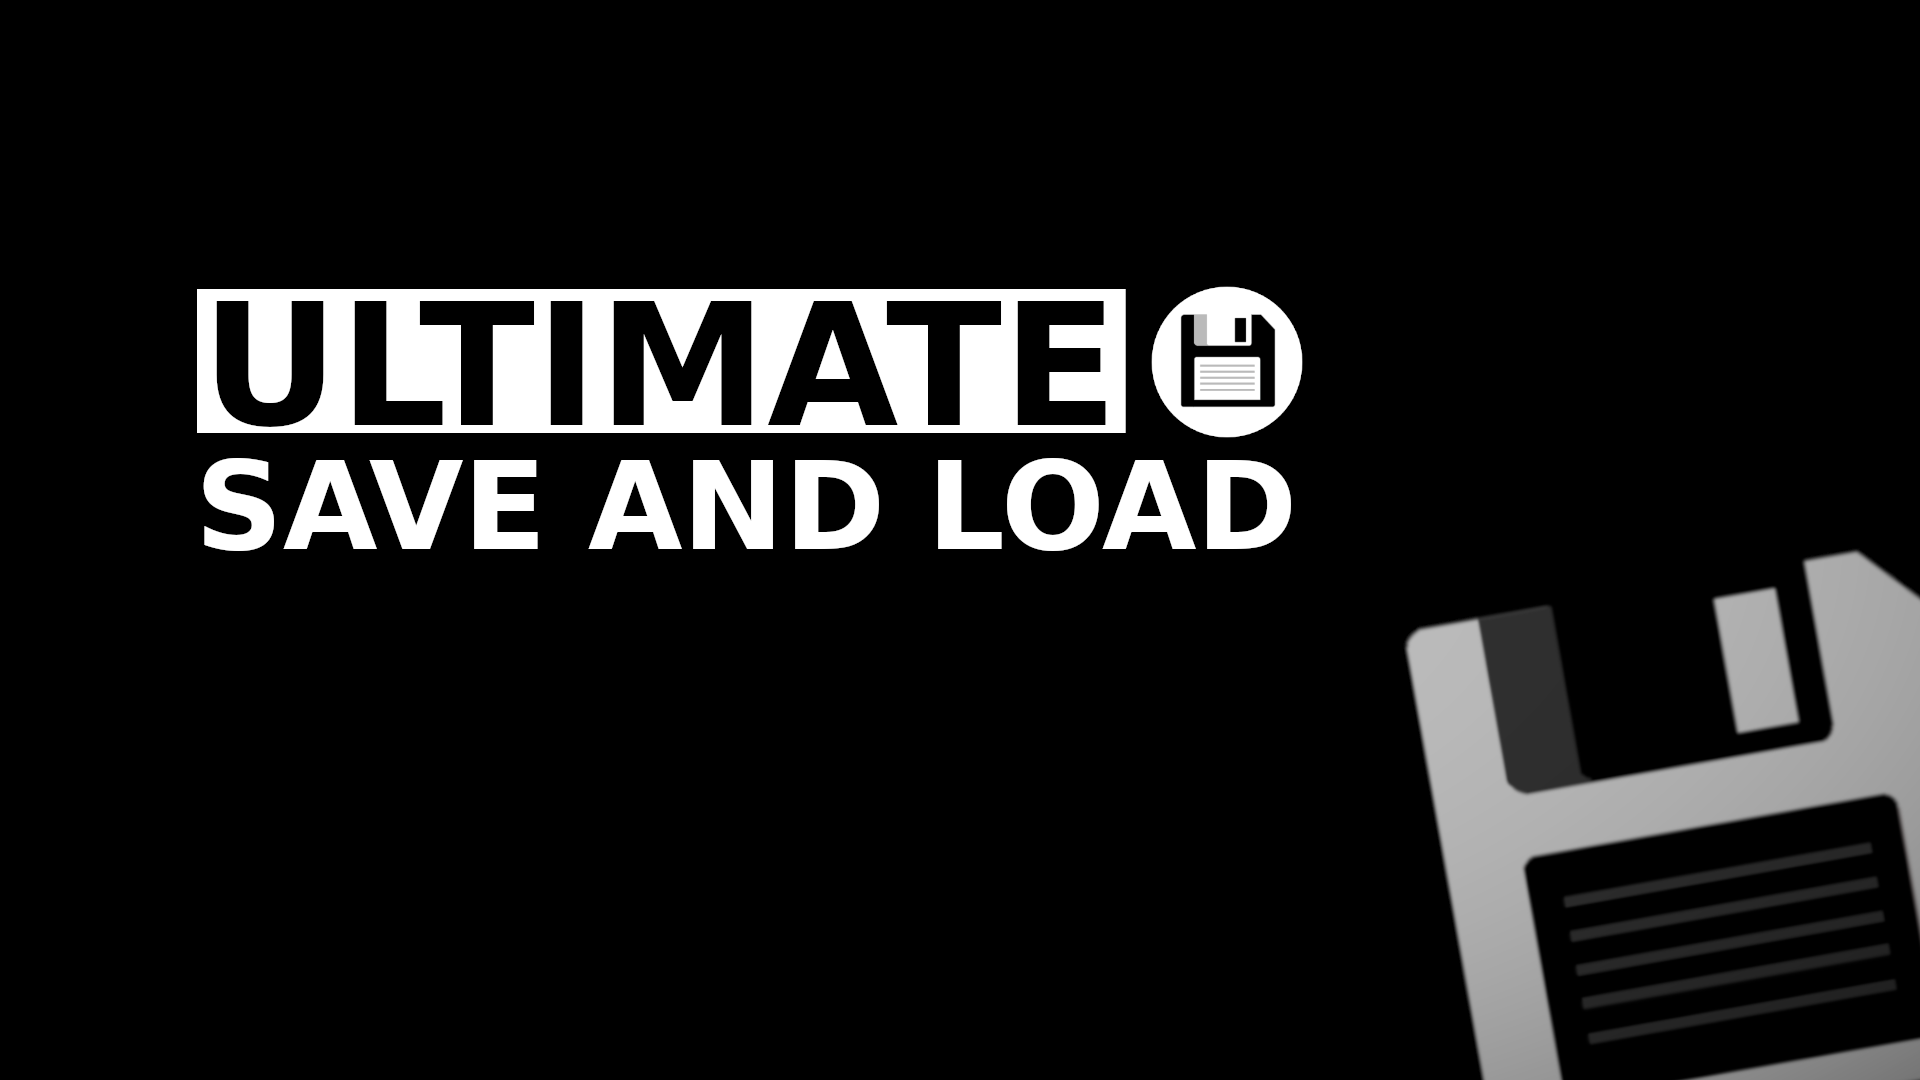 Ultimte Save And Load